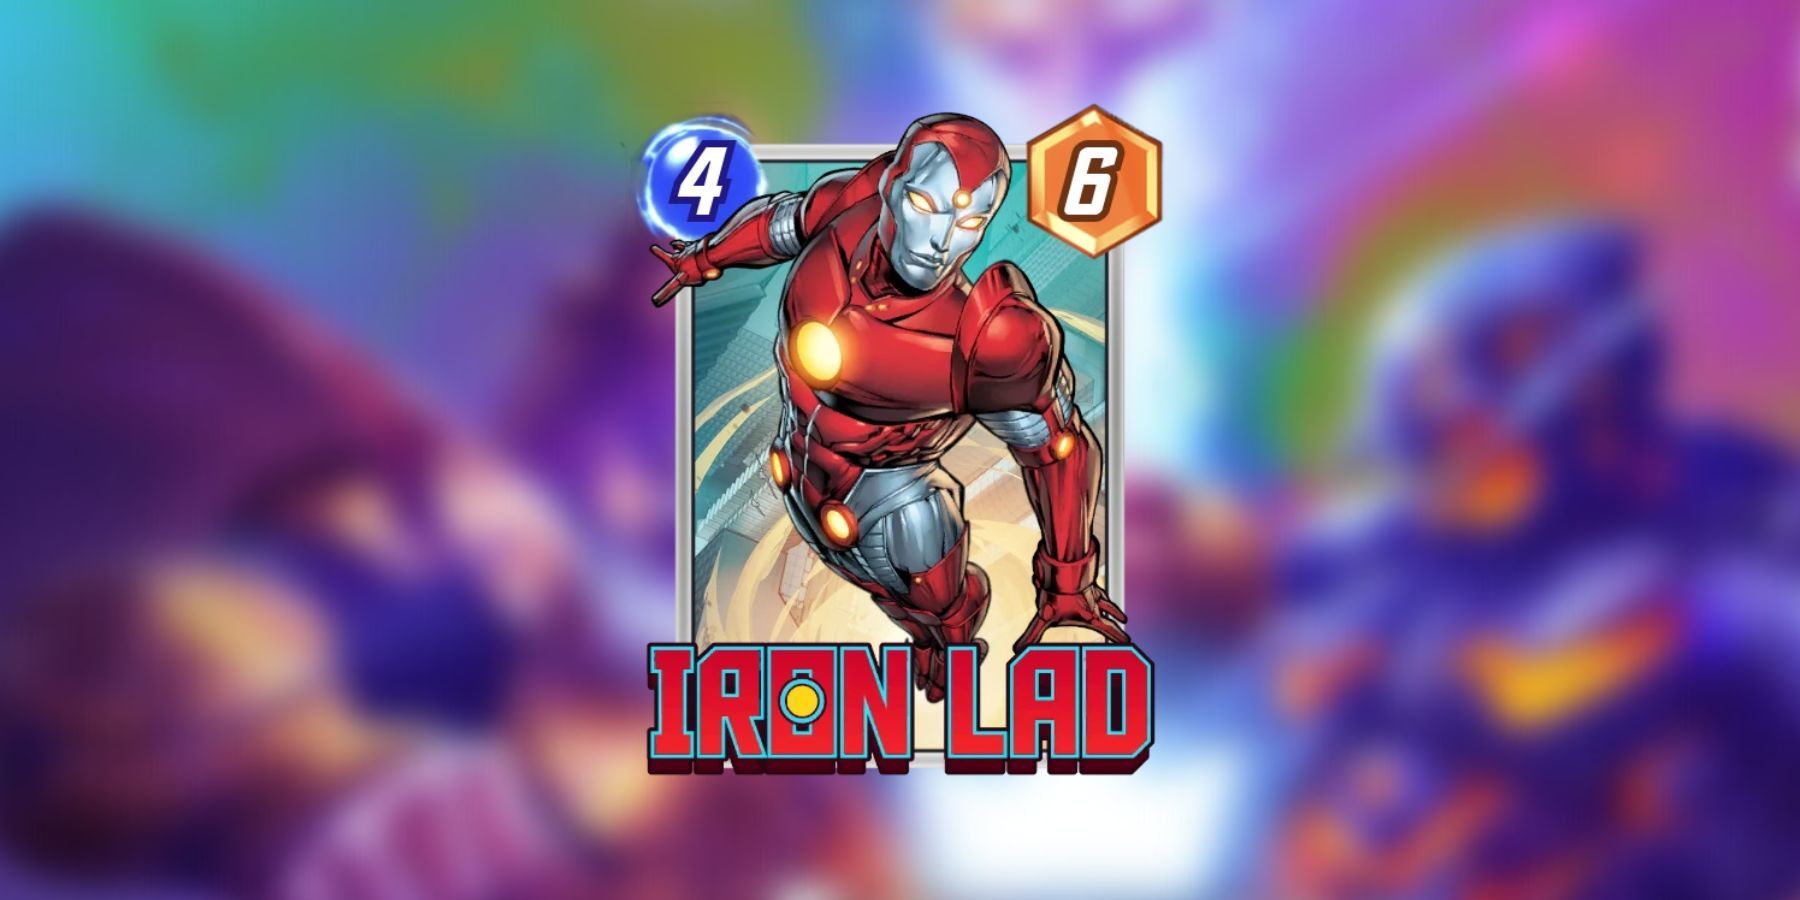 iron lad card in marvel snap.